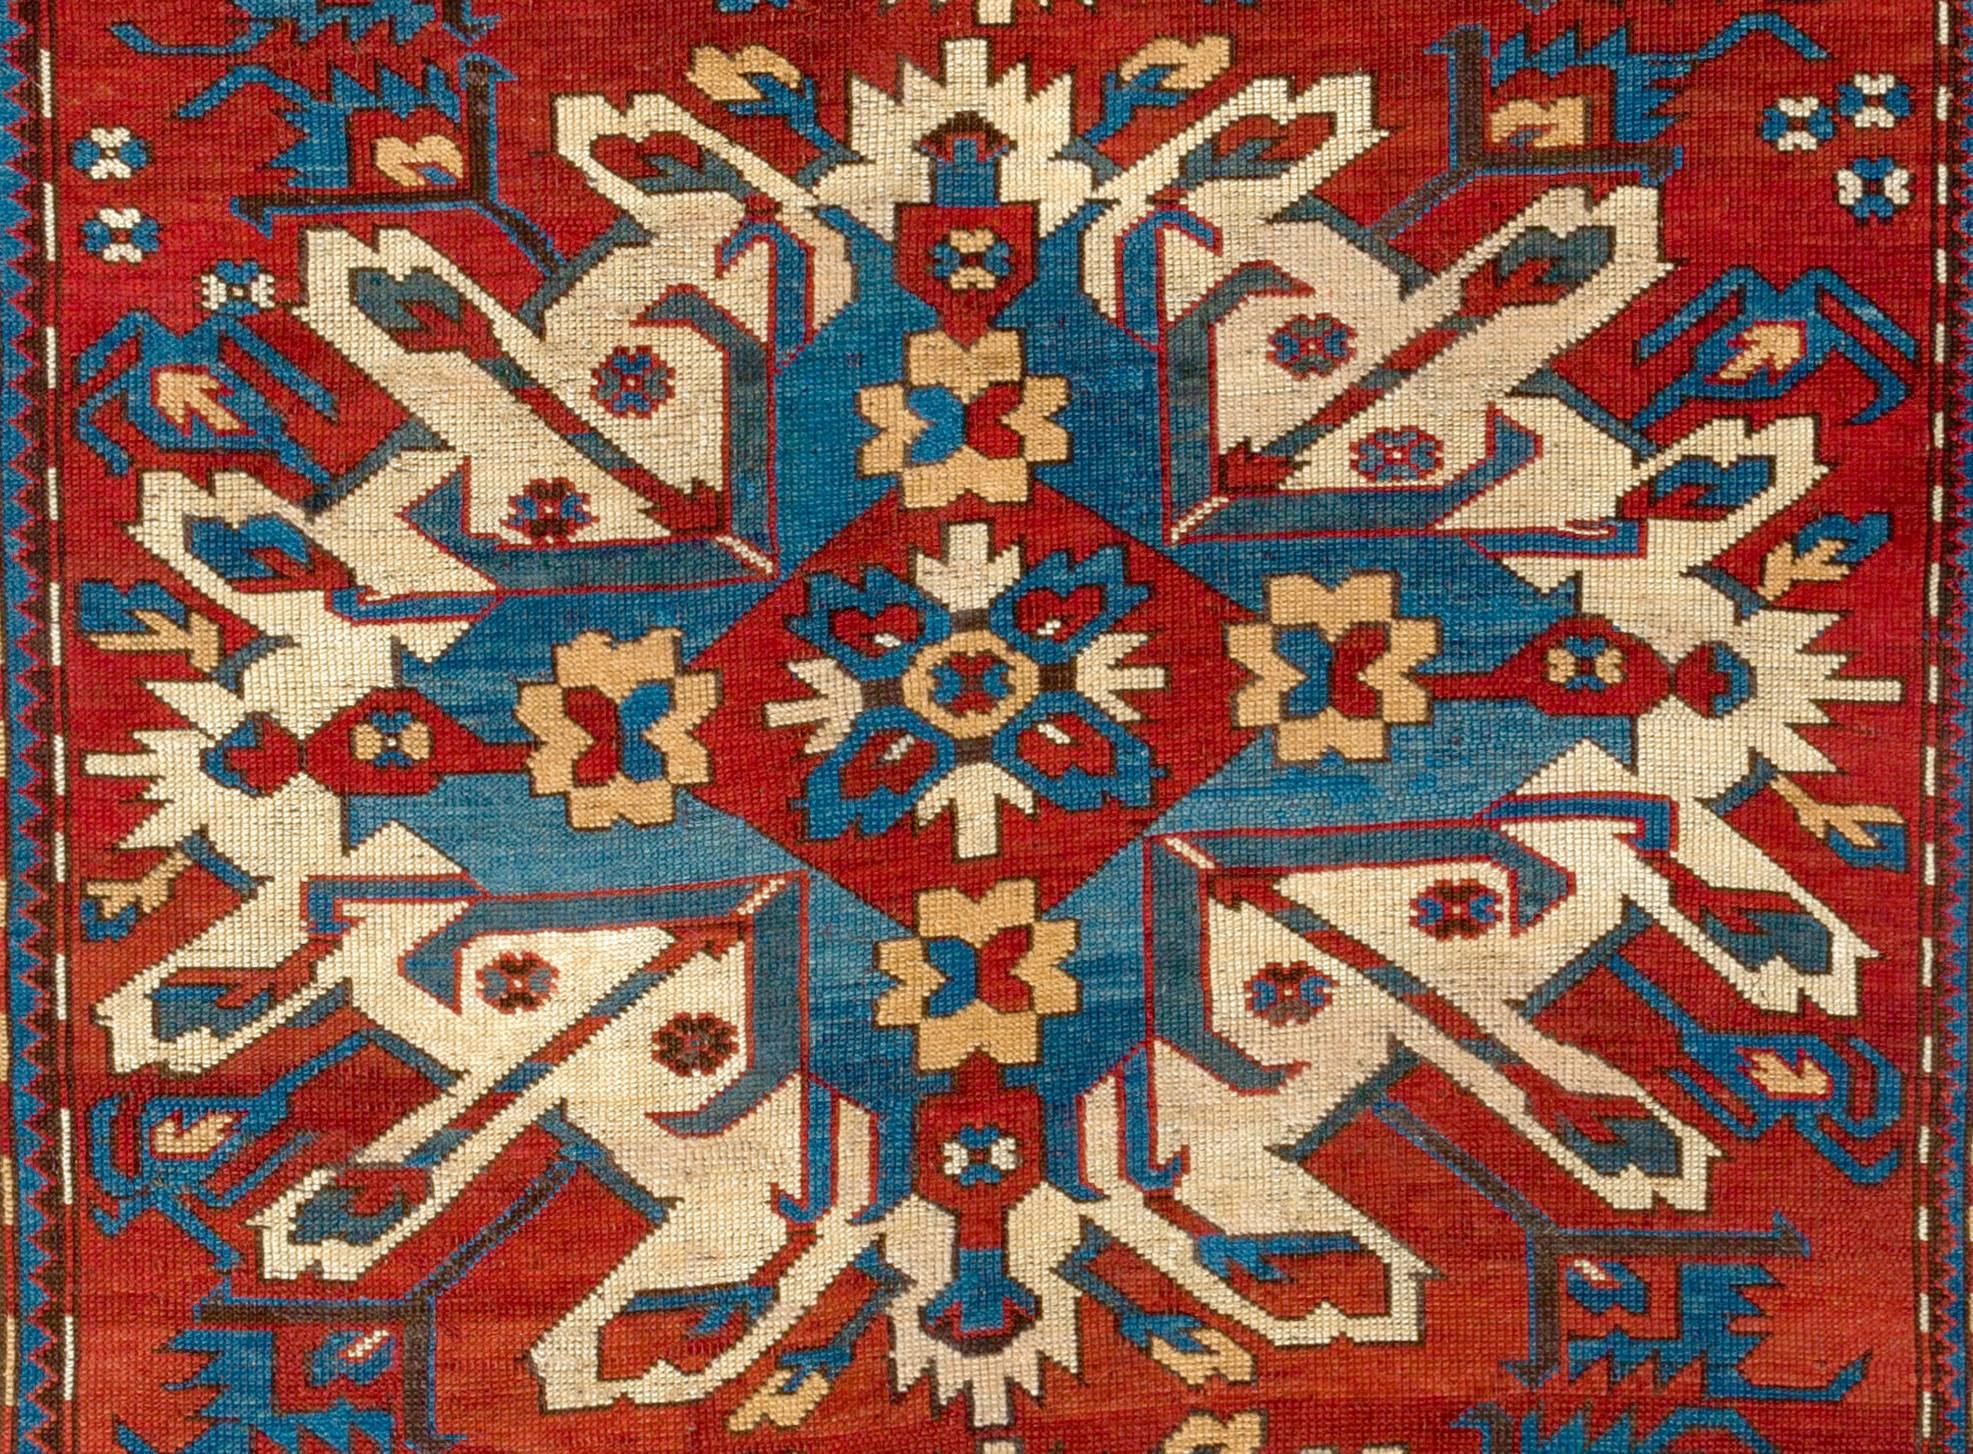 An antique Caucasian rug from the village of Chelaberd in Southern Karabagh. This highly popular so called Sunburst or Eagle Kazak design rugs are some of the most collectible and sought after ones among all antique Caucasian works of textile